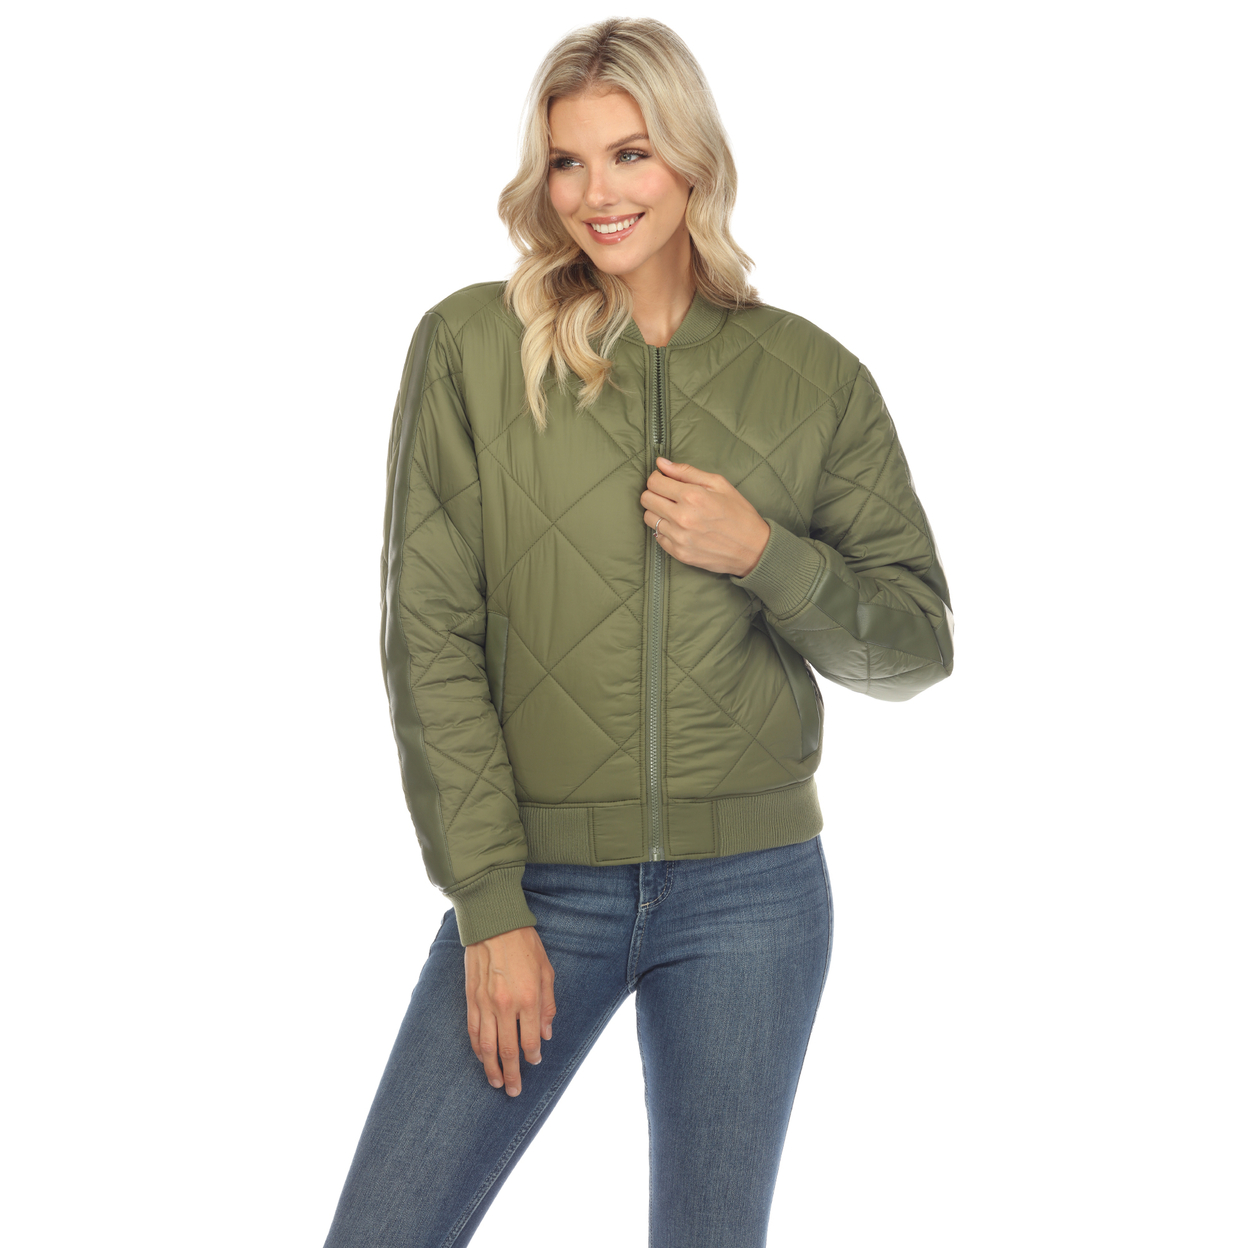 White Mark Women's Quilted Puffer Bomber Jacket - Olive, Small